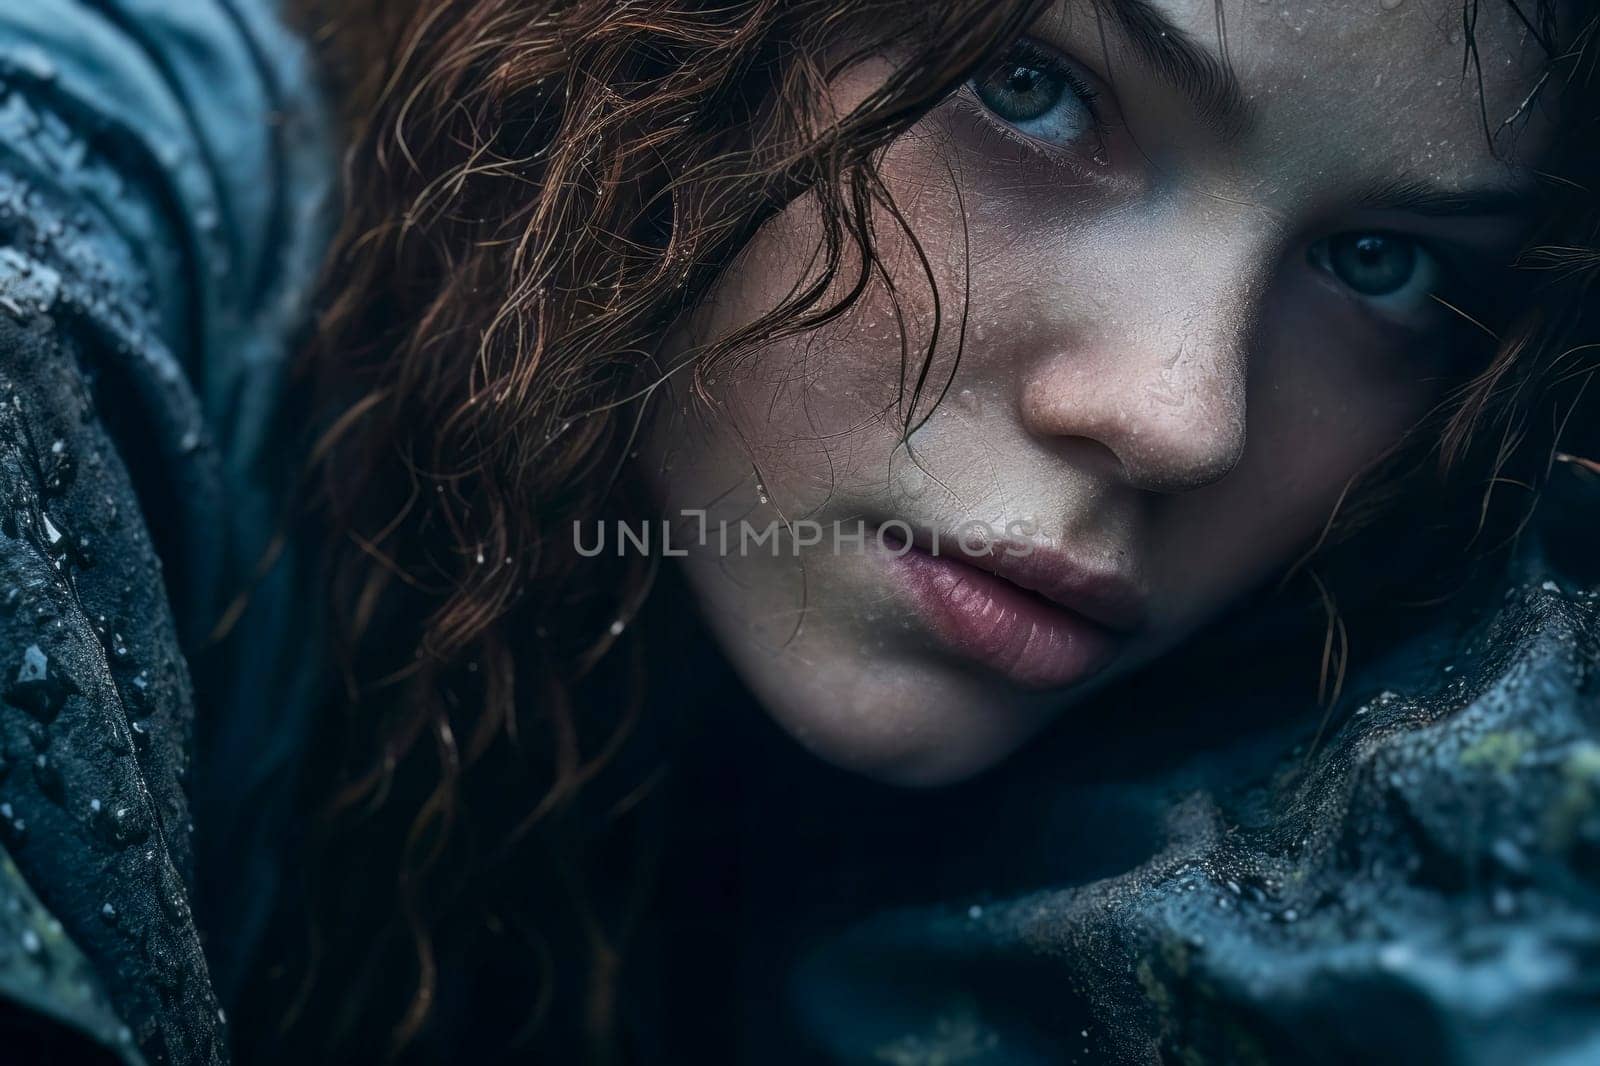 This captivating close-up portrait features a sad girl with closed eyes and an intense gaze, representing the symbol of burnout.